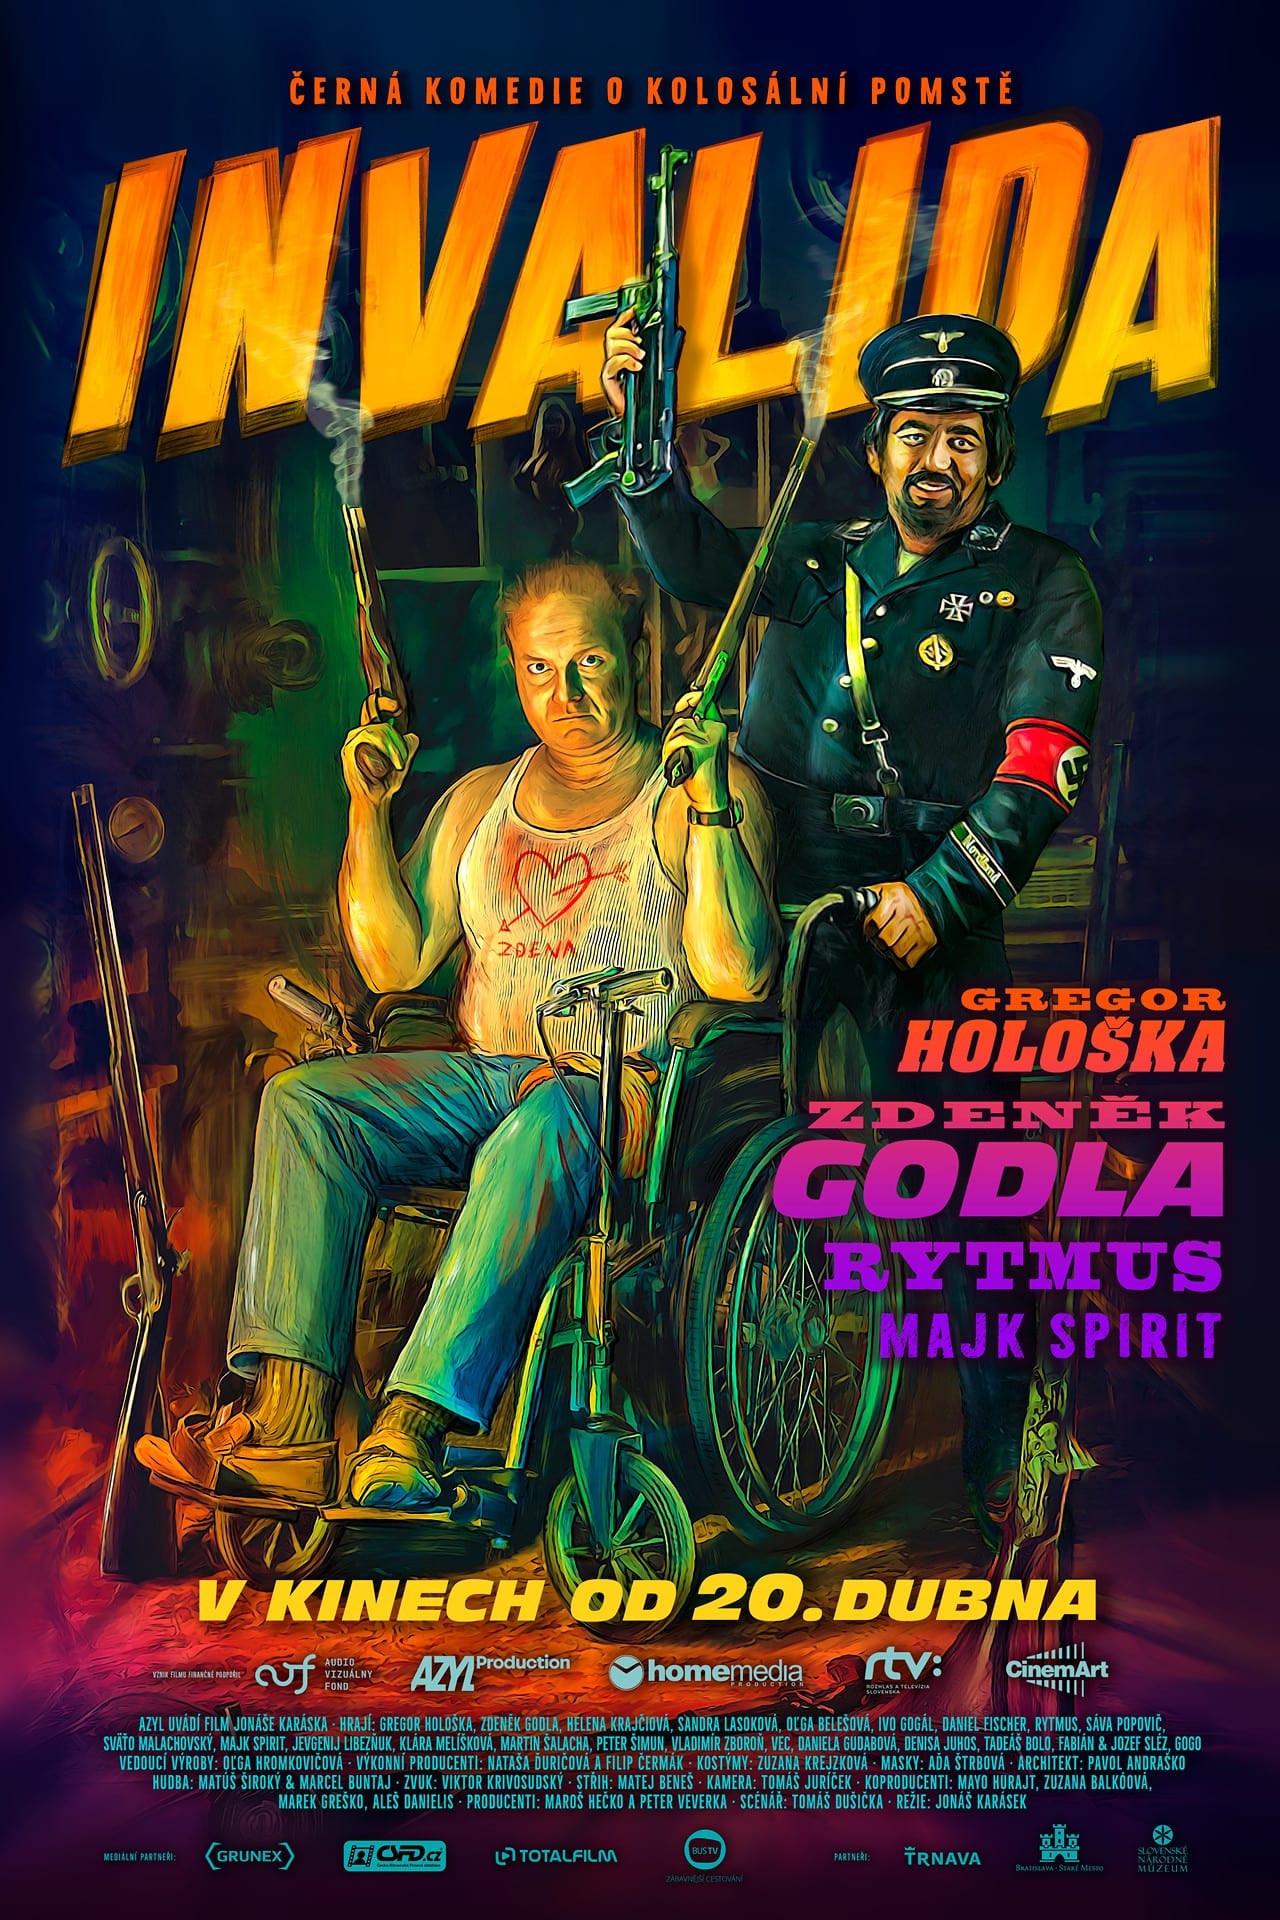 Poster for the movie "Invalida"